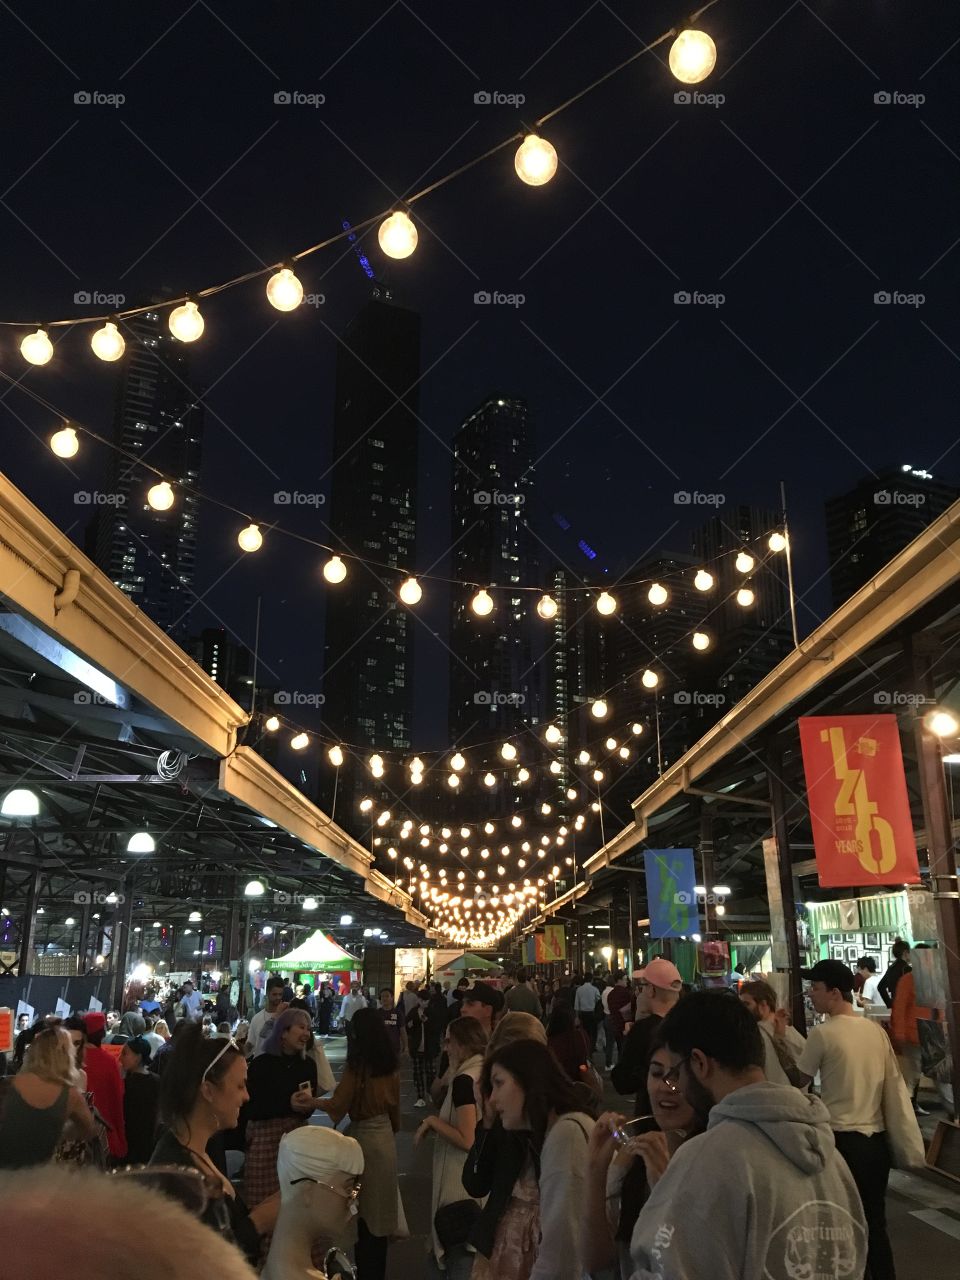 Melbourne Market with dotted lights and the city landscape in the background. Excellent food, flowers and fun on offer. 